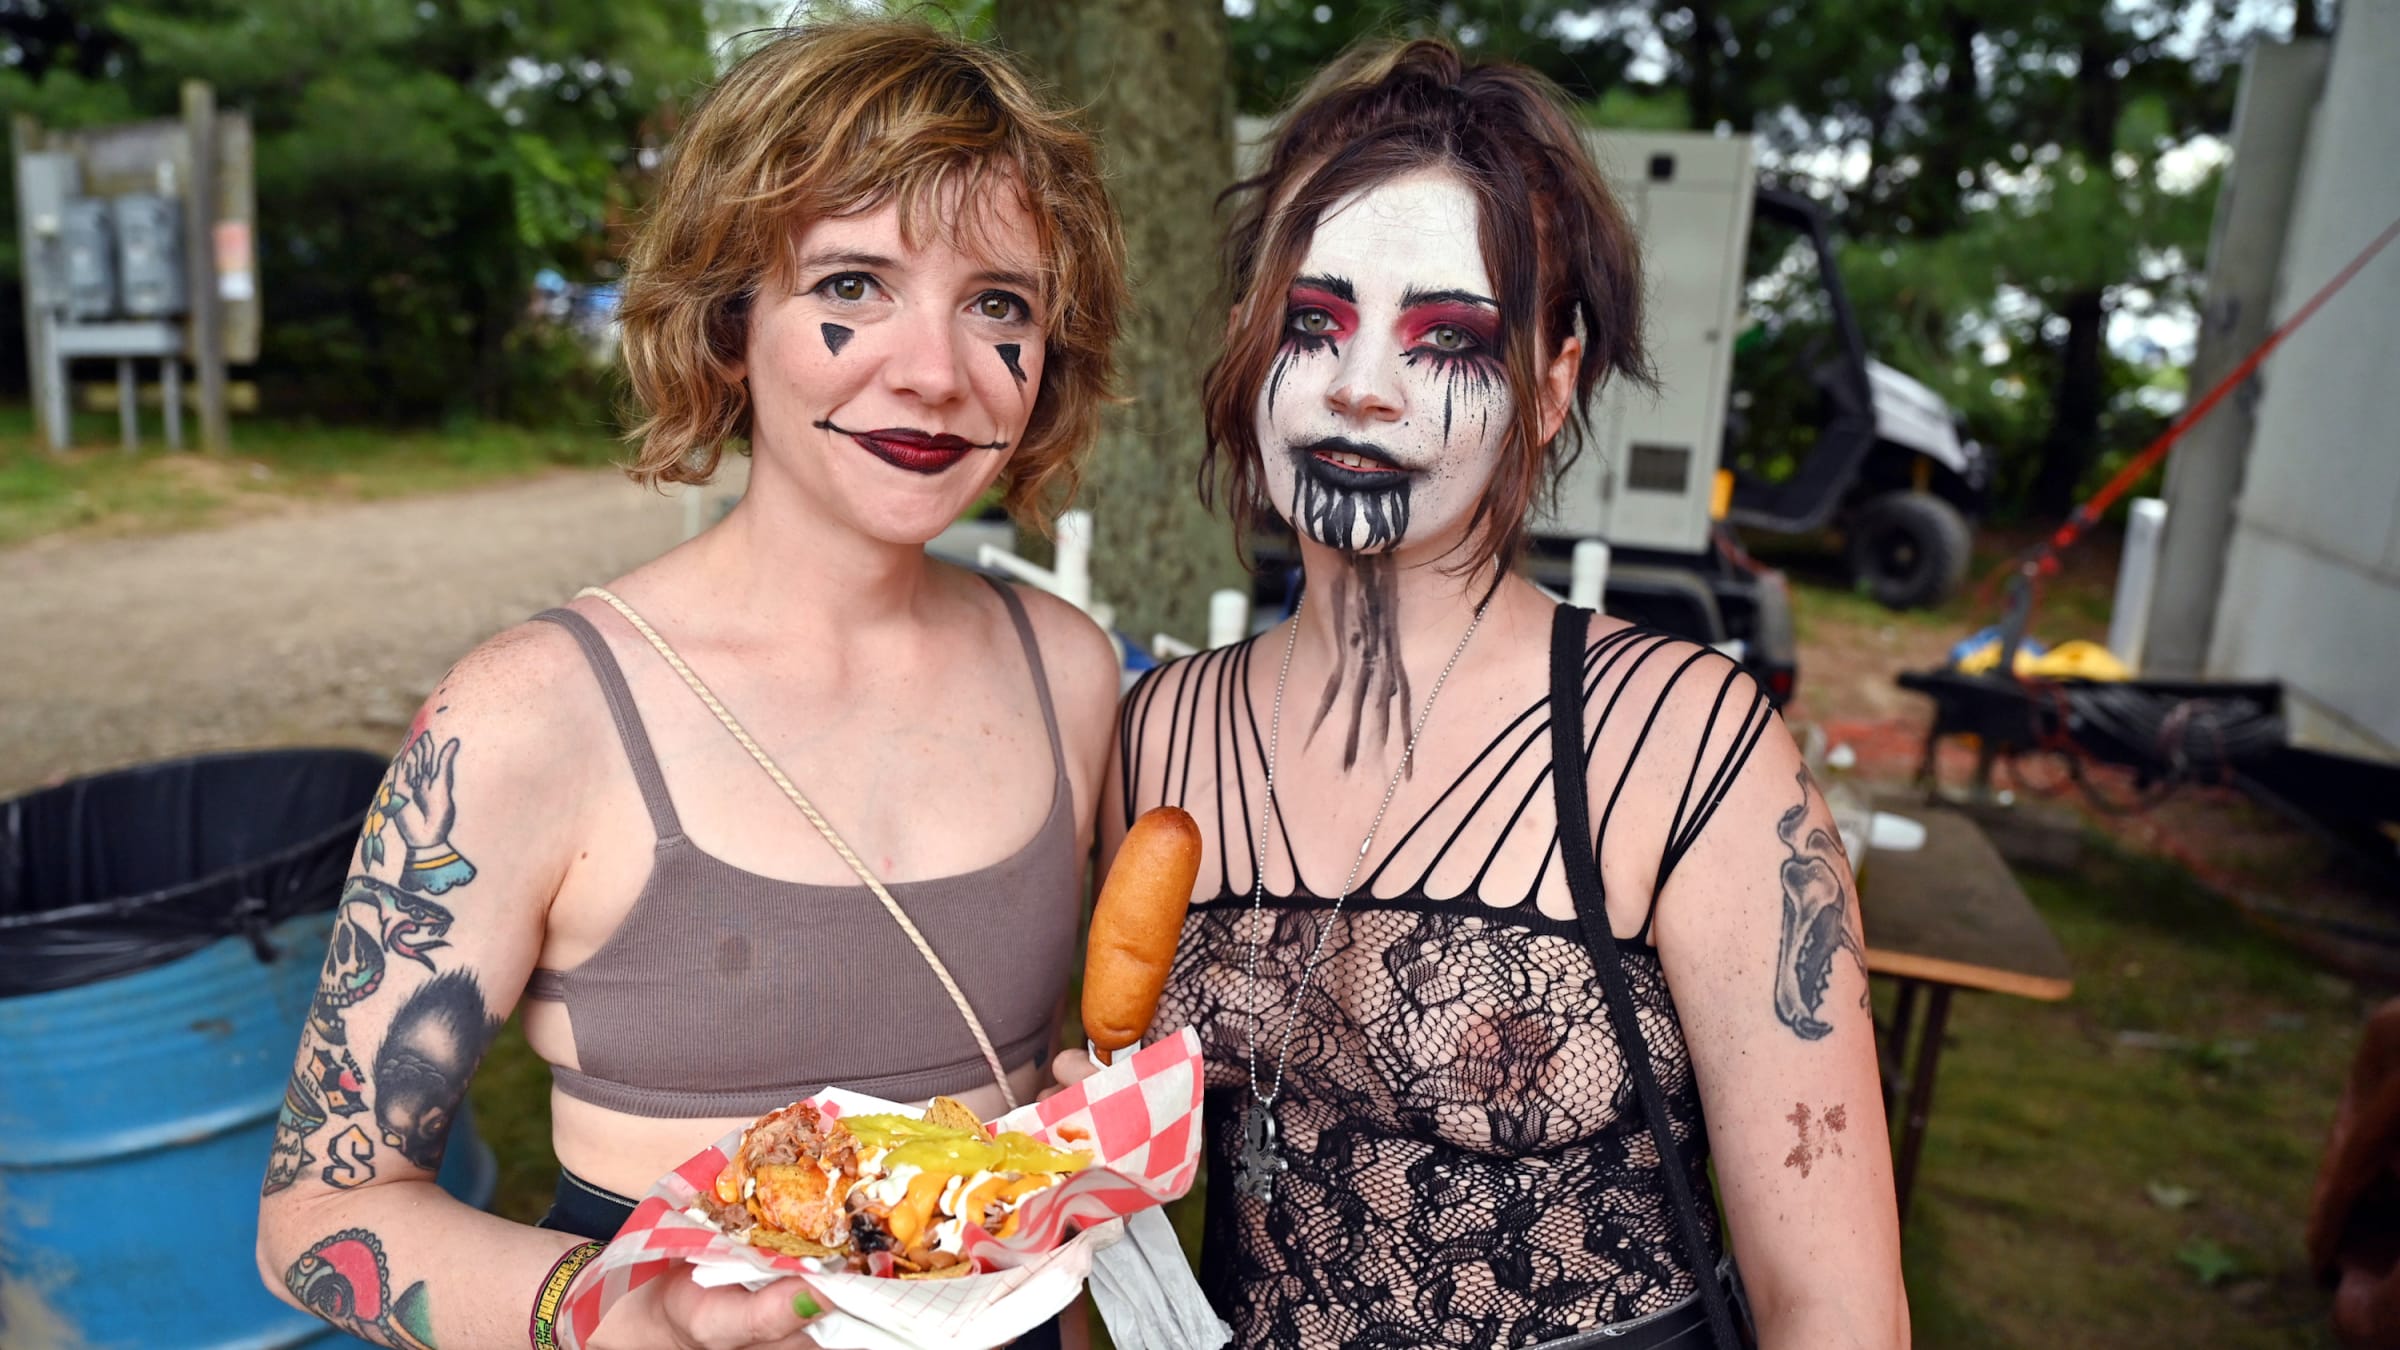 Two fans pose together at the 2023 Gathering of the Juggalos